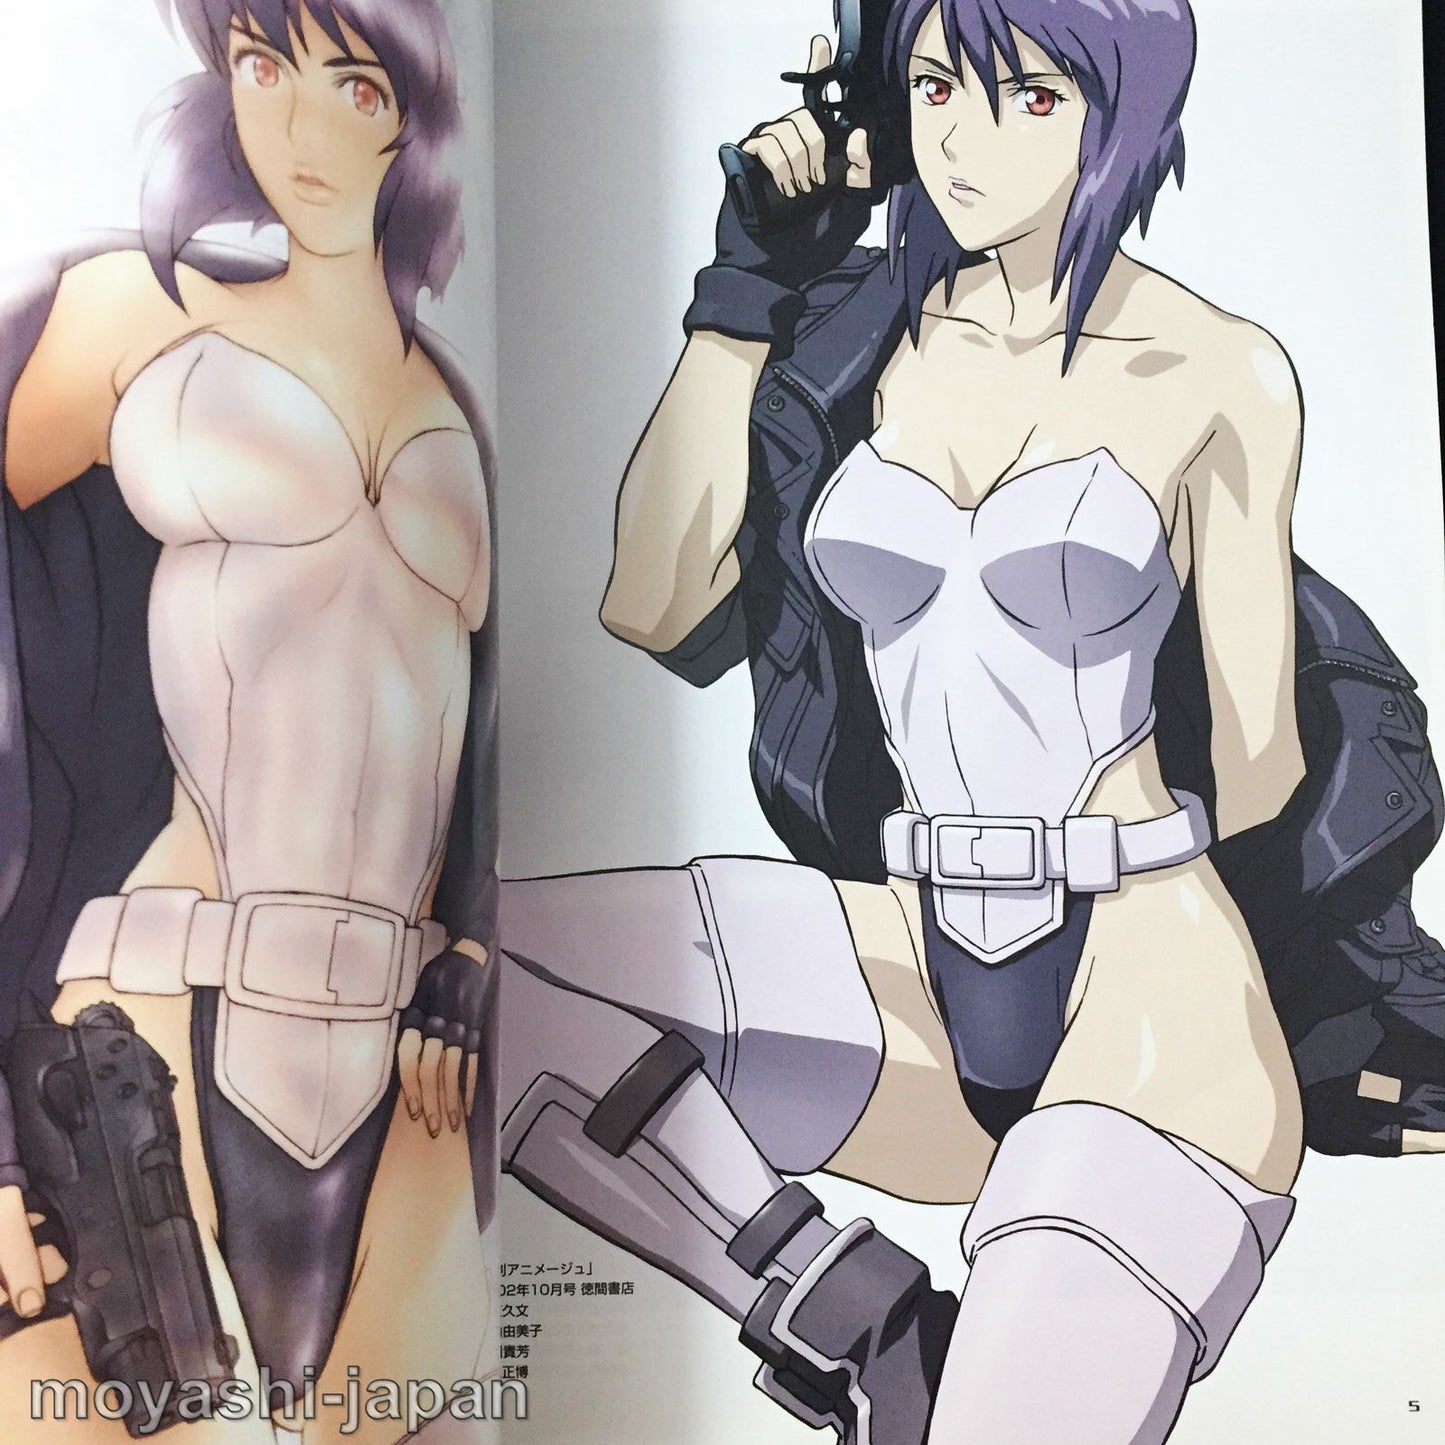 GHOST IN THE SHELL STAND ALONE COMPLEX VISUAL BOOK